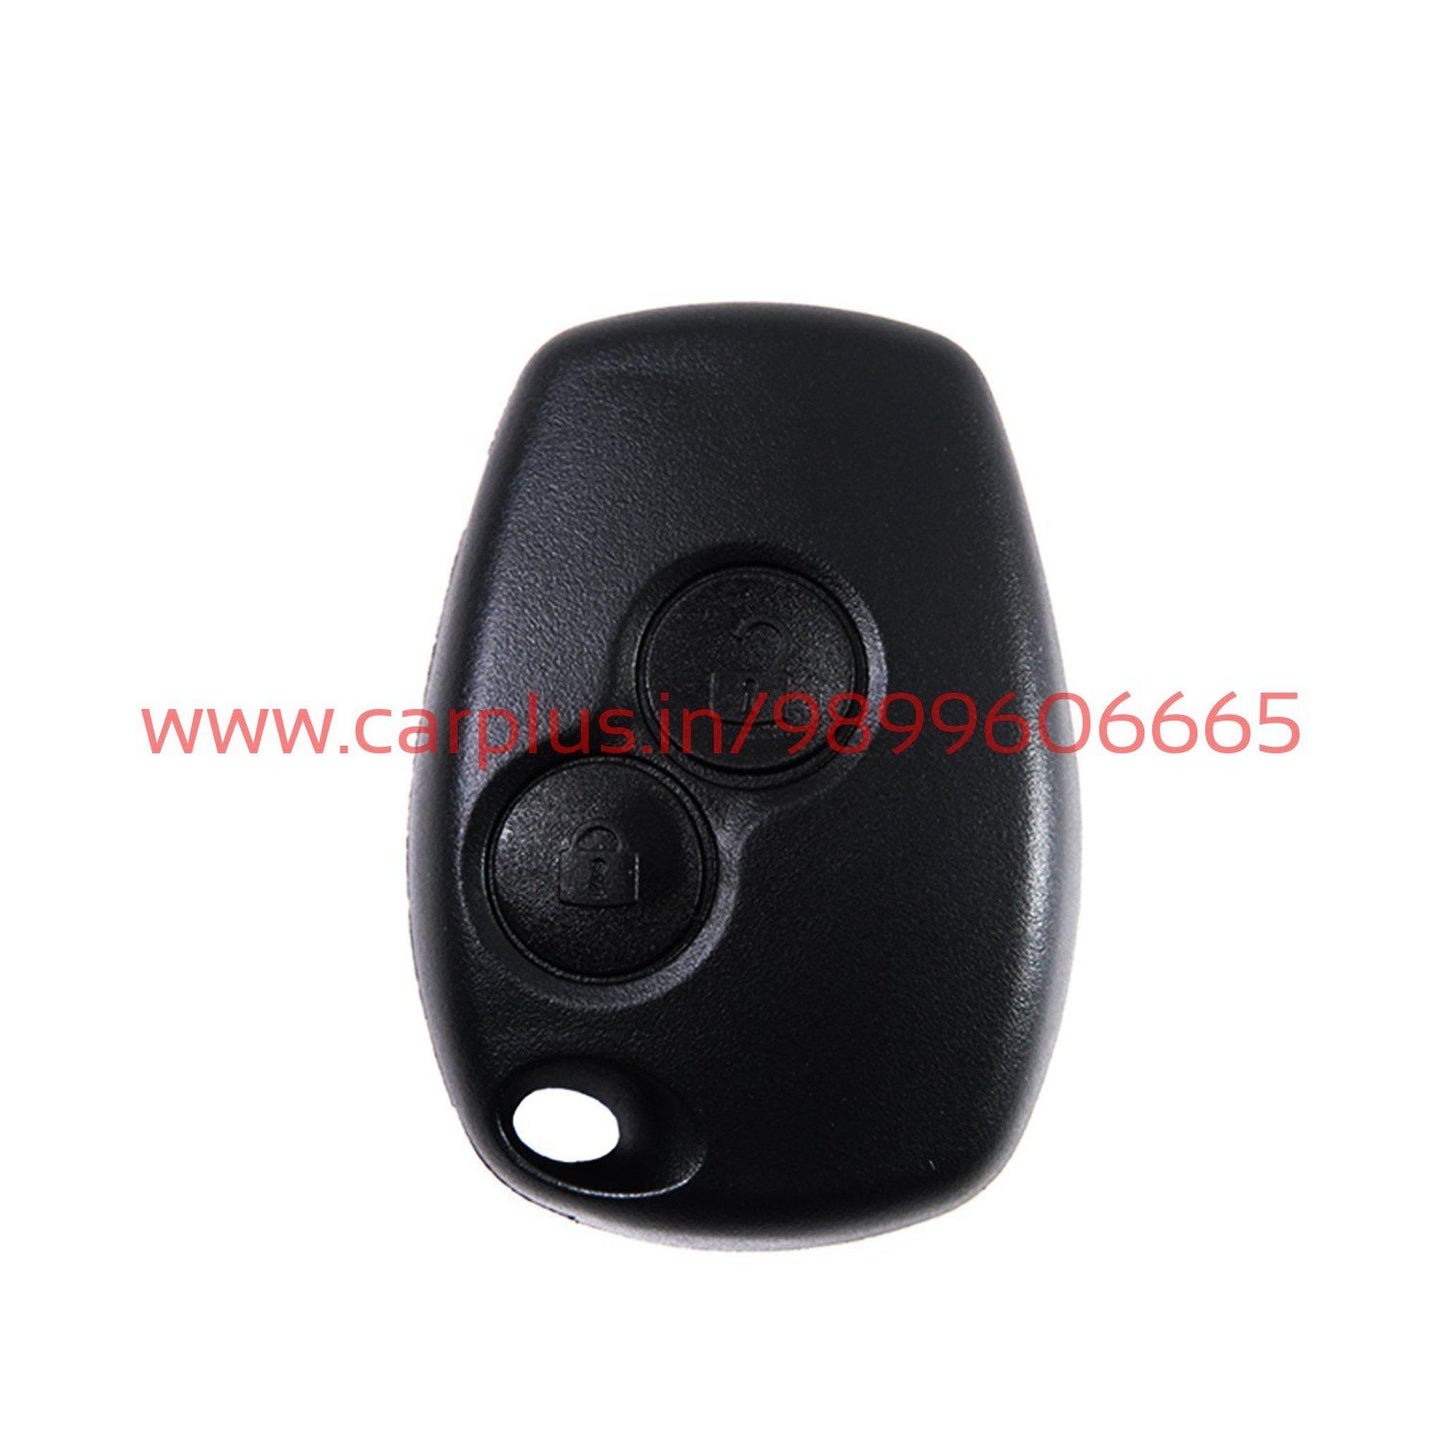 
                  
                    KMH Replacement Key Shell Front & Back For Renault 2 Button KMH-REPLACEMENT KEY SHELL REPLACEMENT KEY SHELL.
                  
                